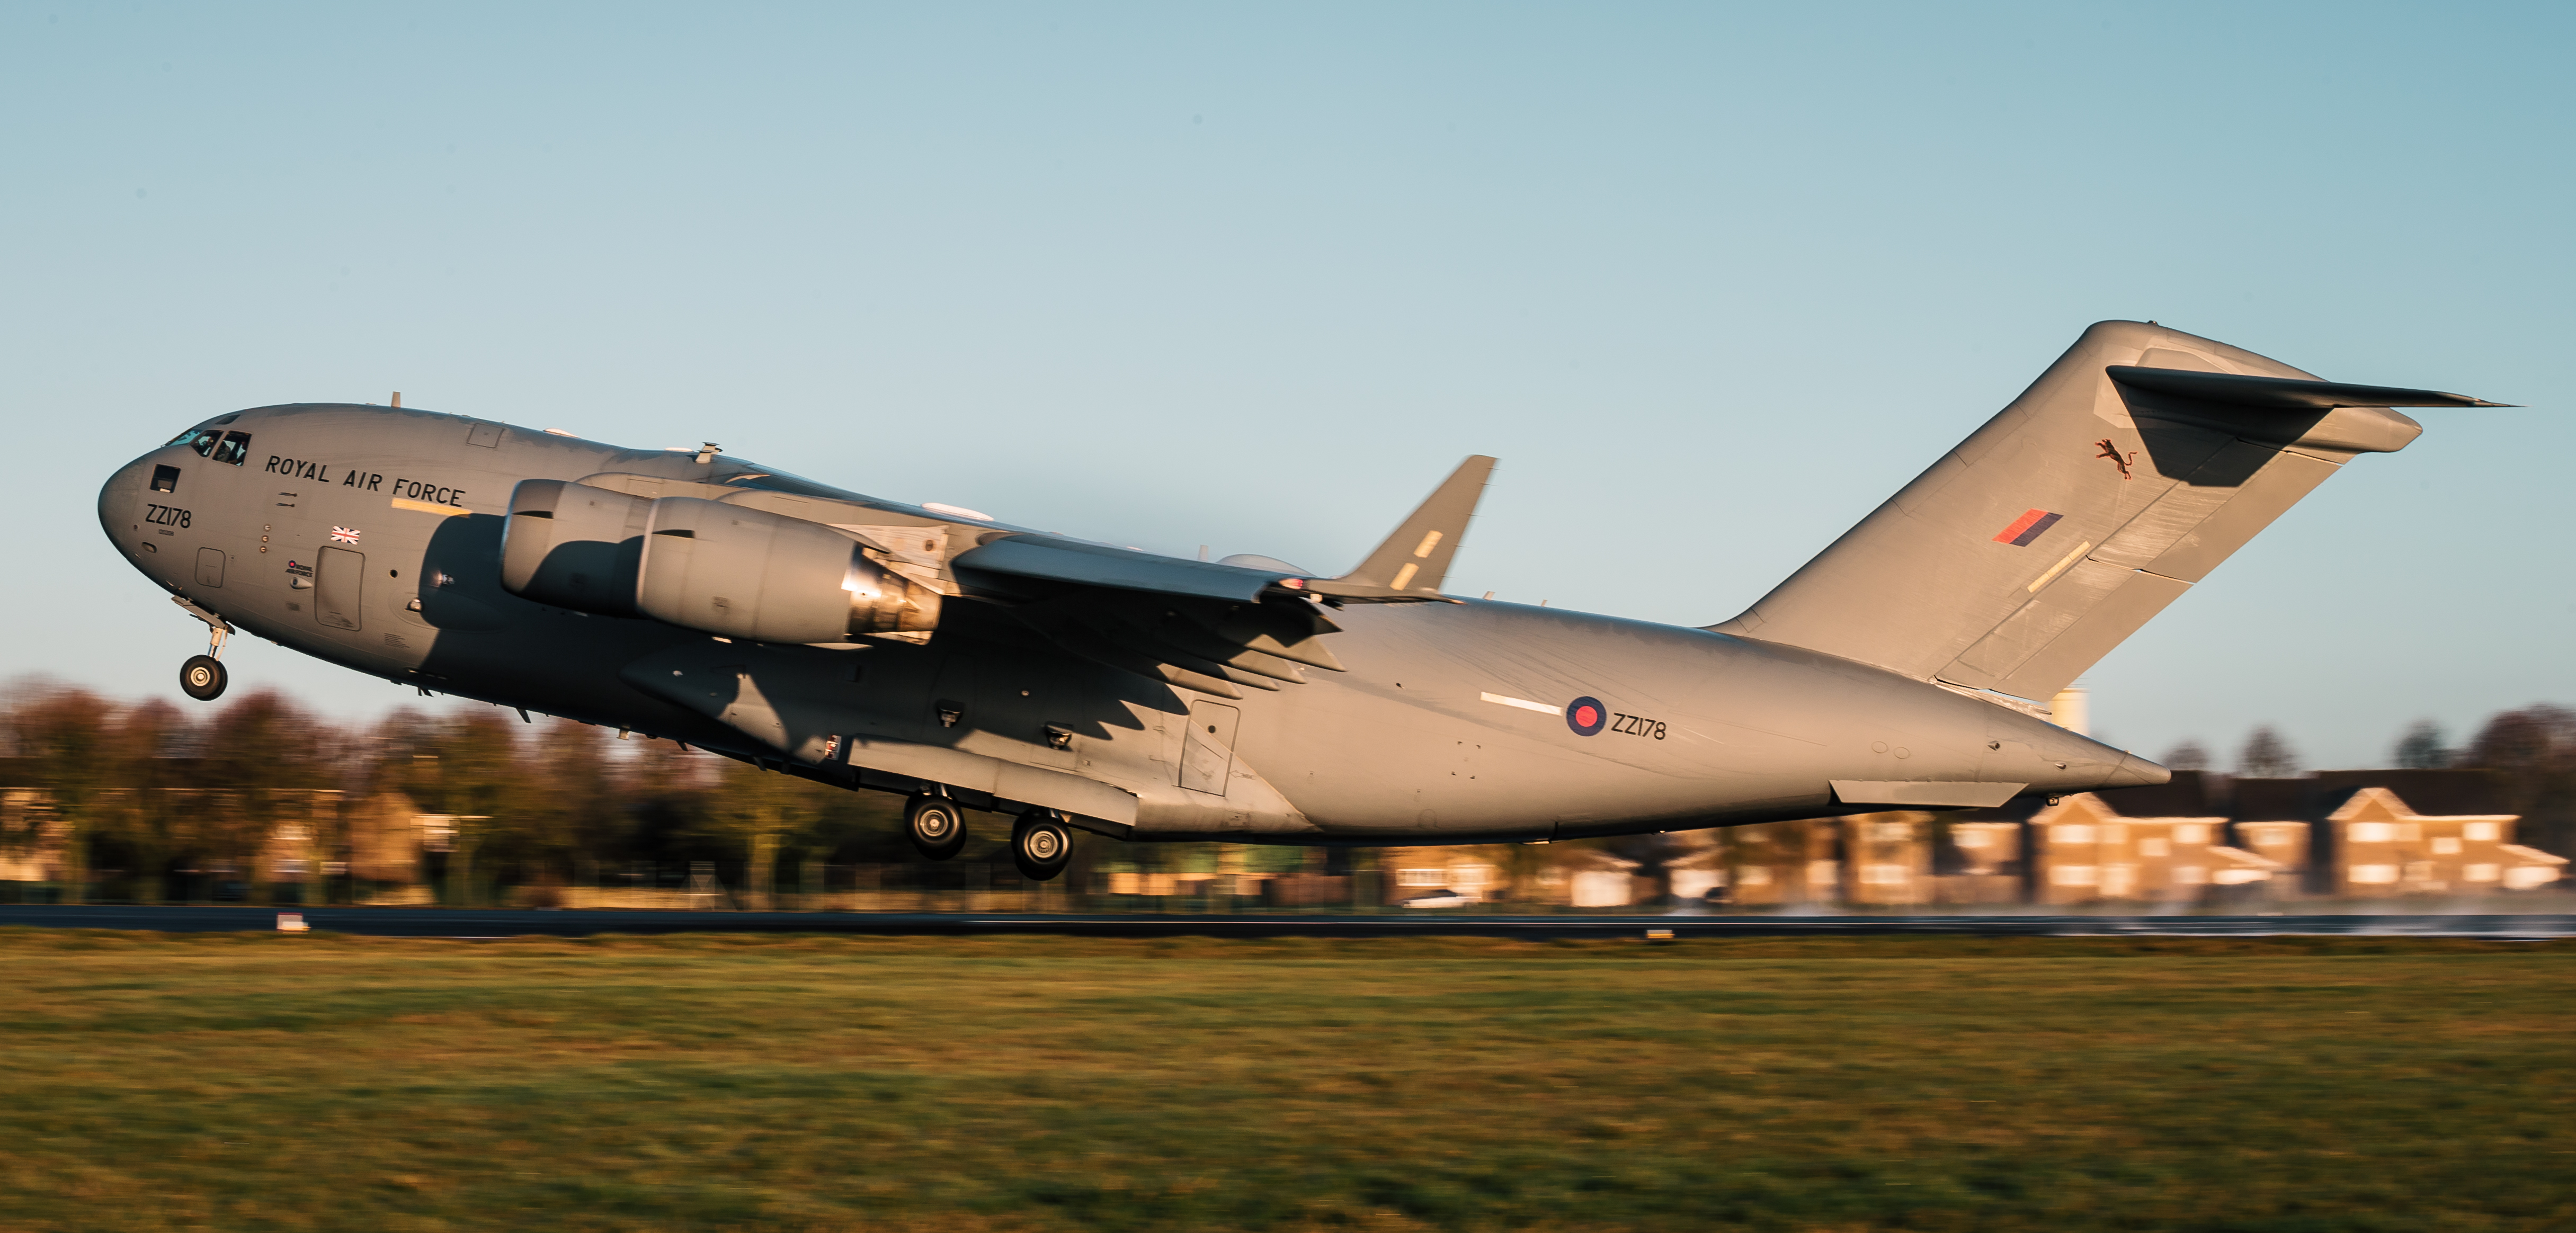 Image shows an RAF C-17 taking off.